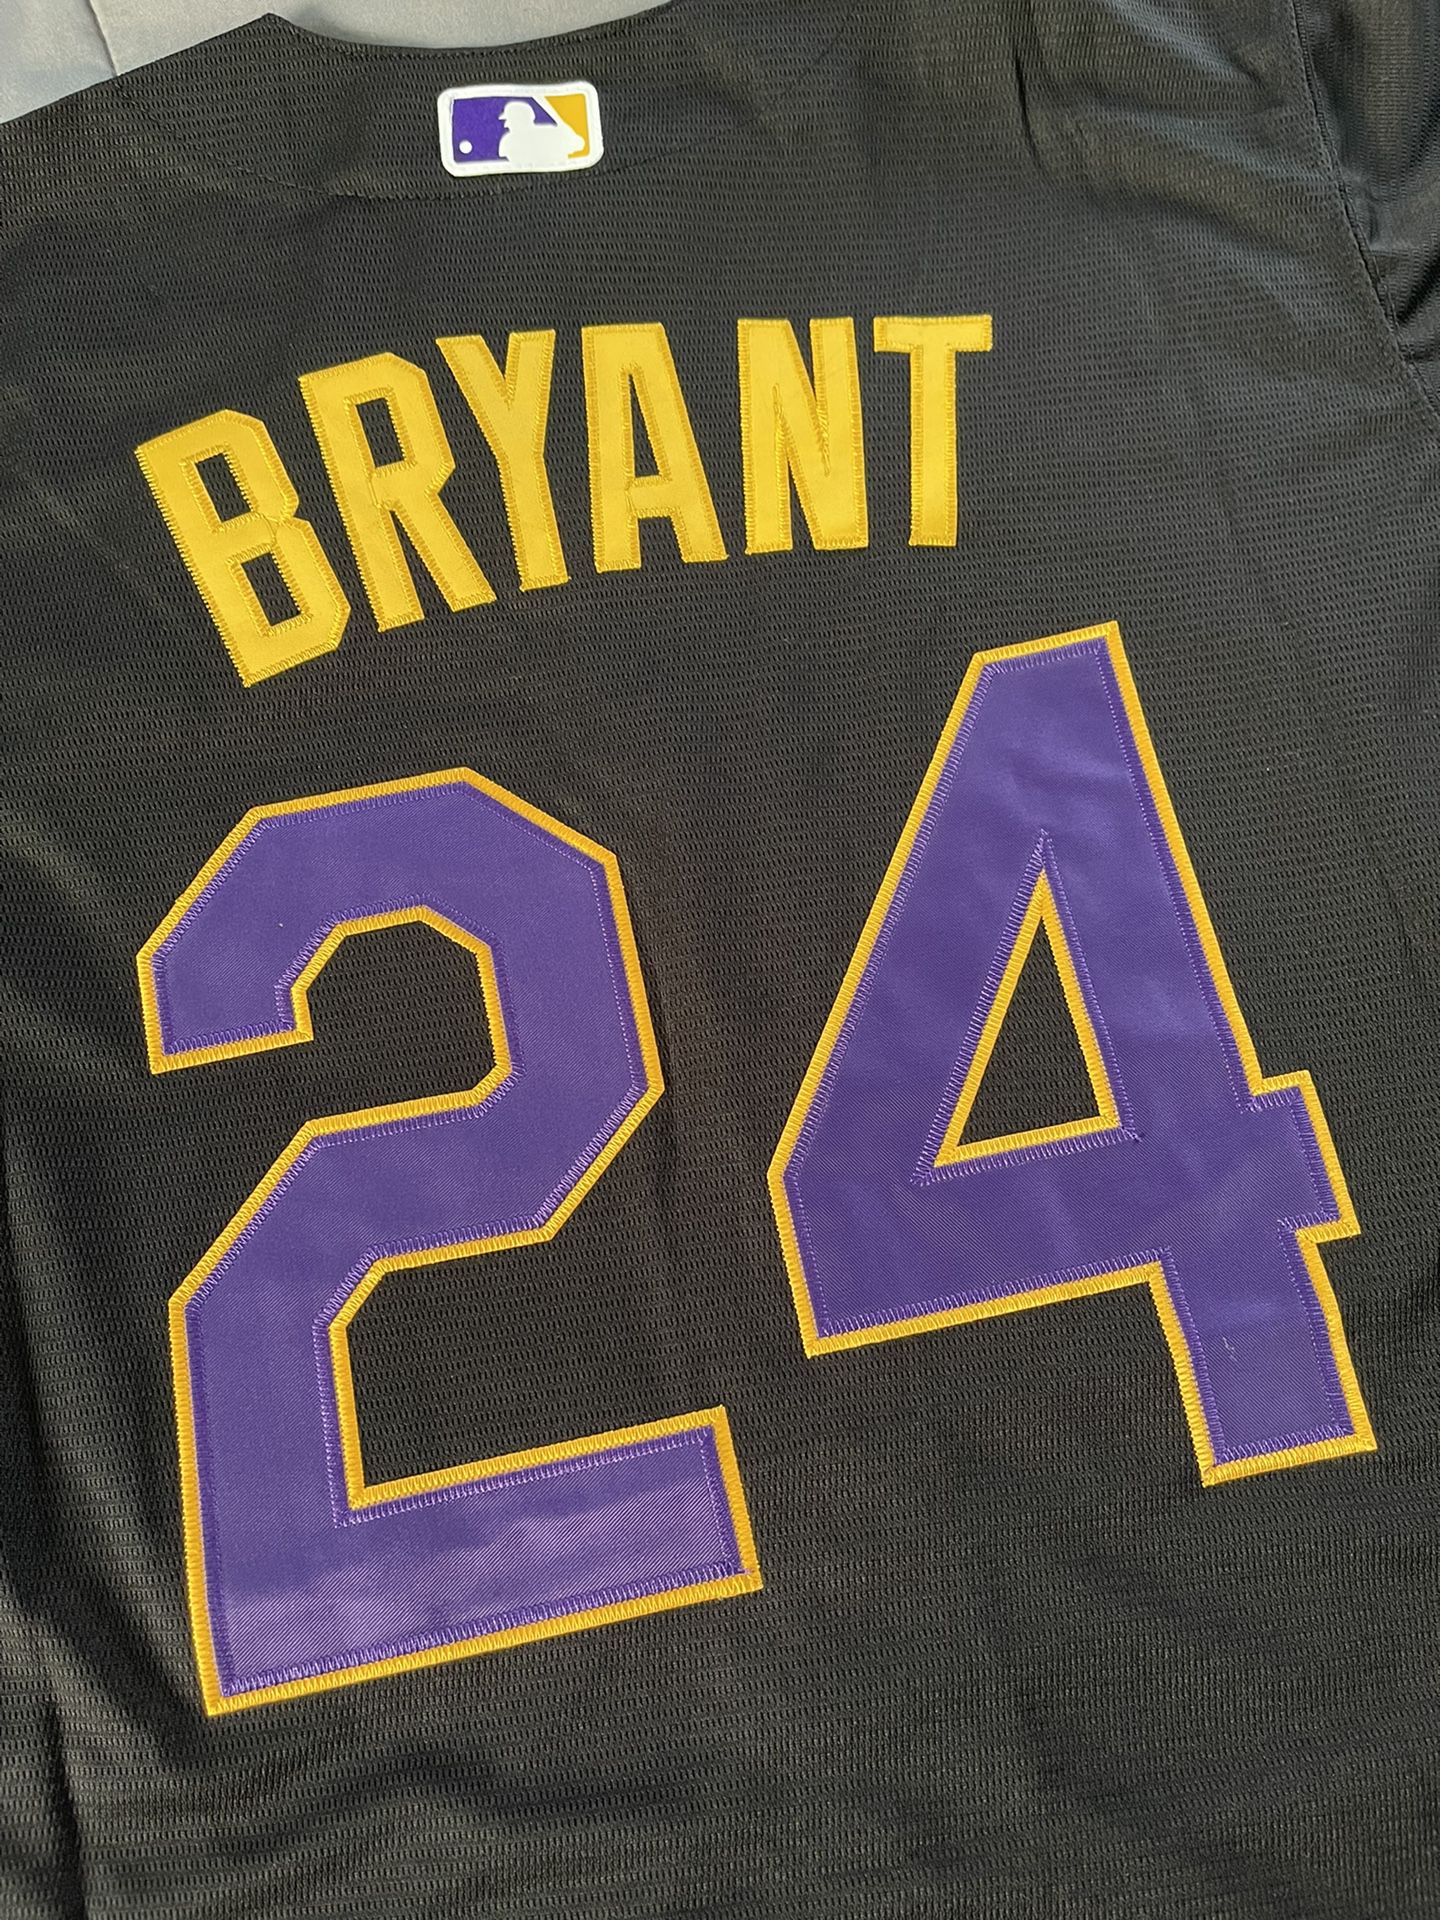 Kobe Bryant Black Mamba L.A. Los Angeles Lakers Jersey Snakeskin for Sale  in Hesperia, CA - OfferUp